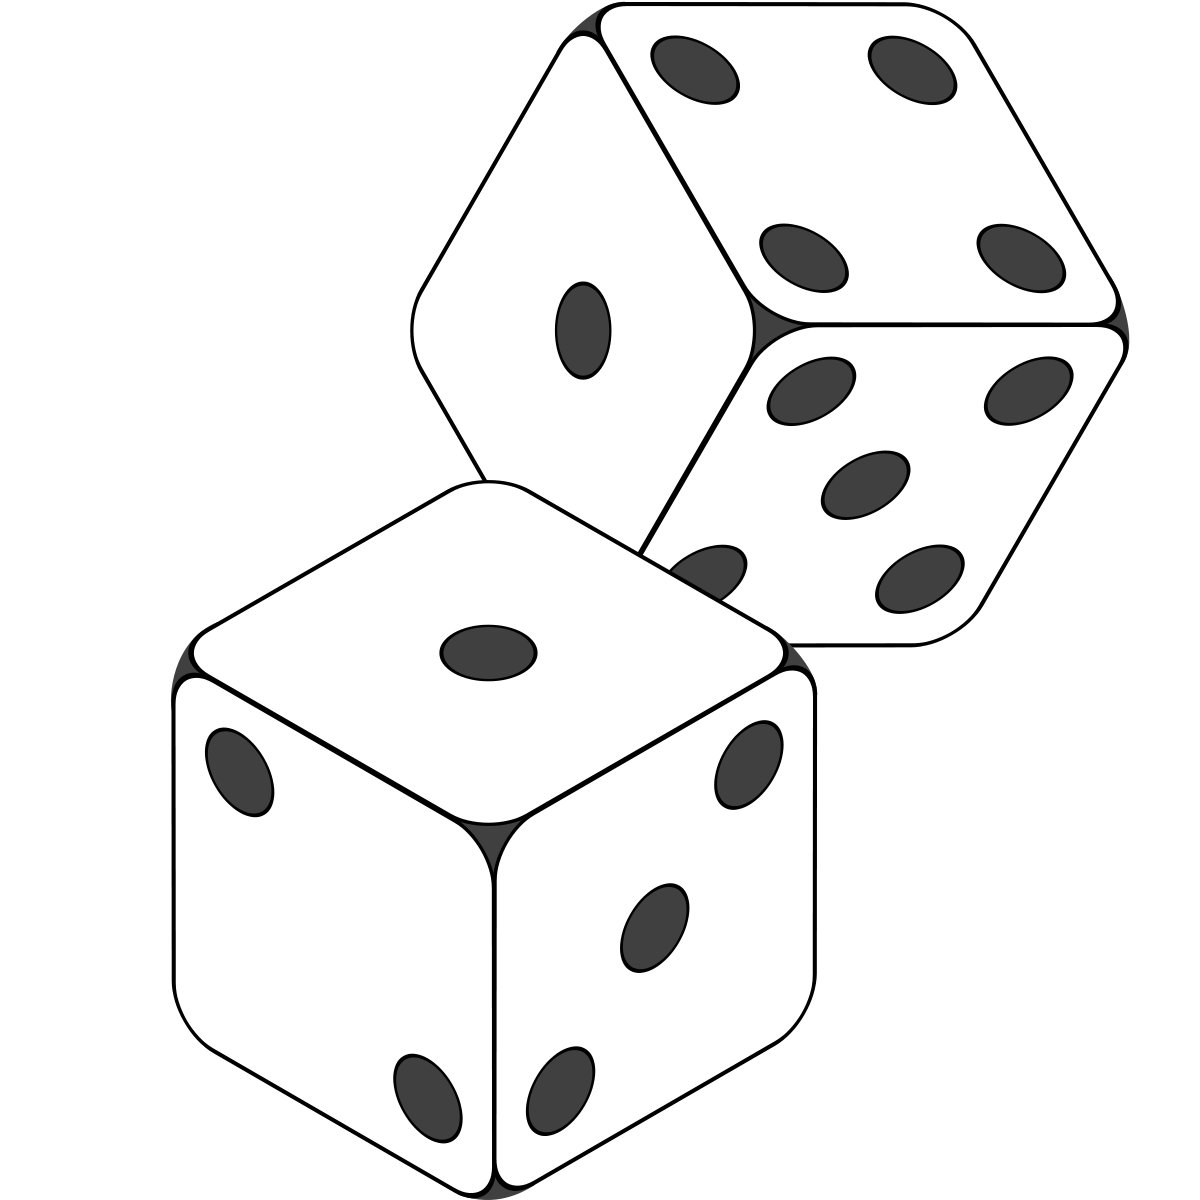 Two ordinary and plain white dice